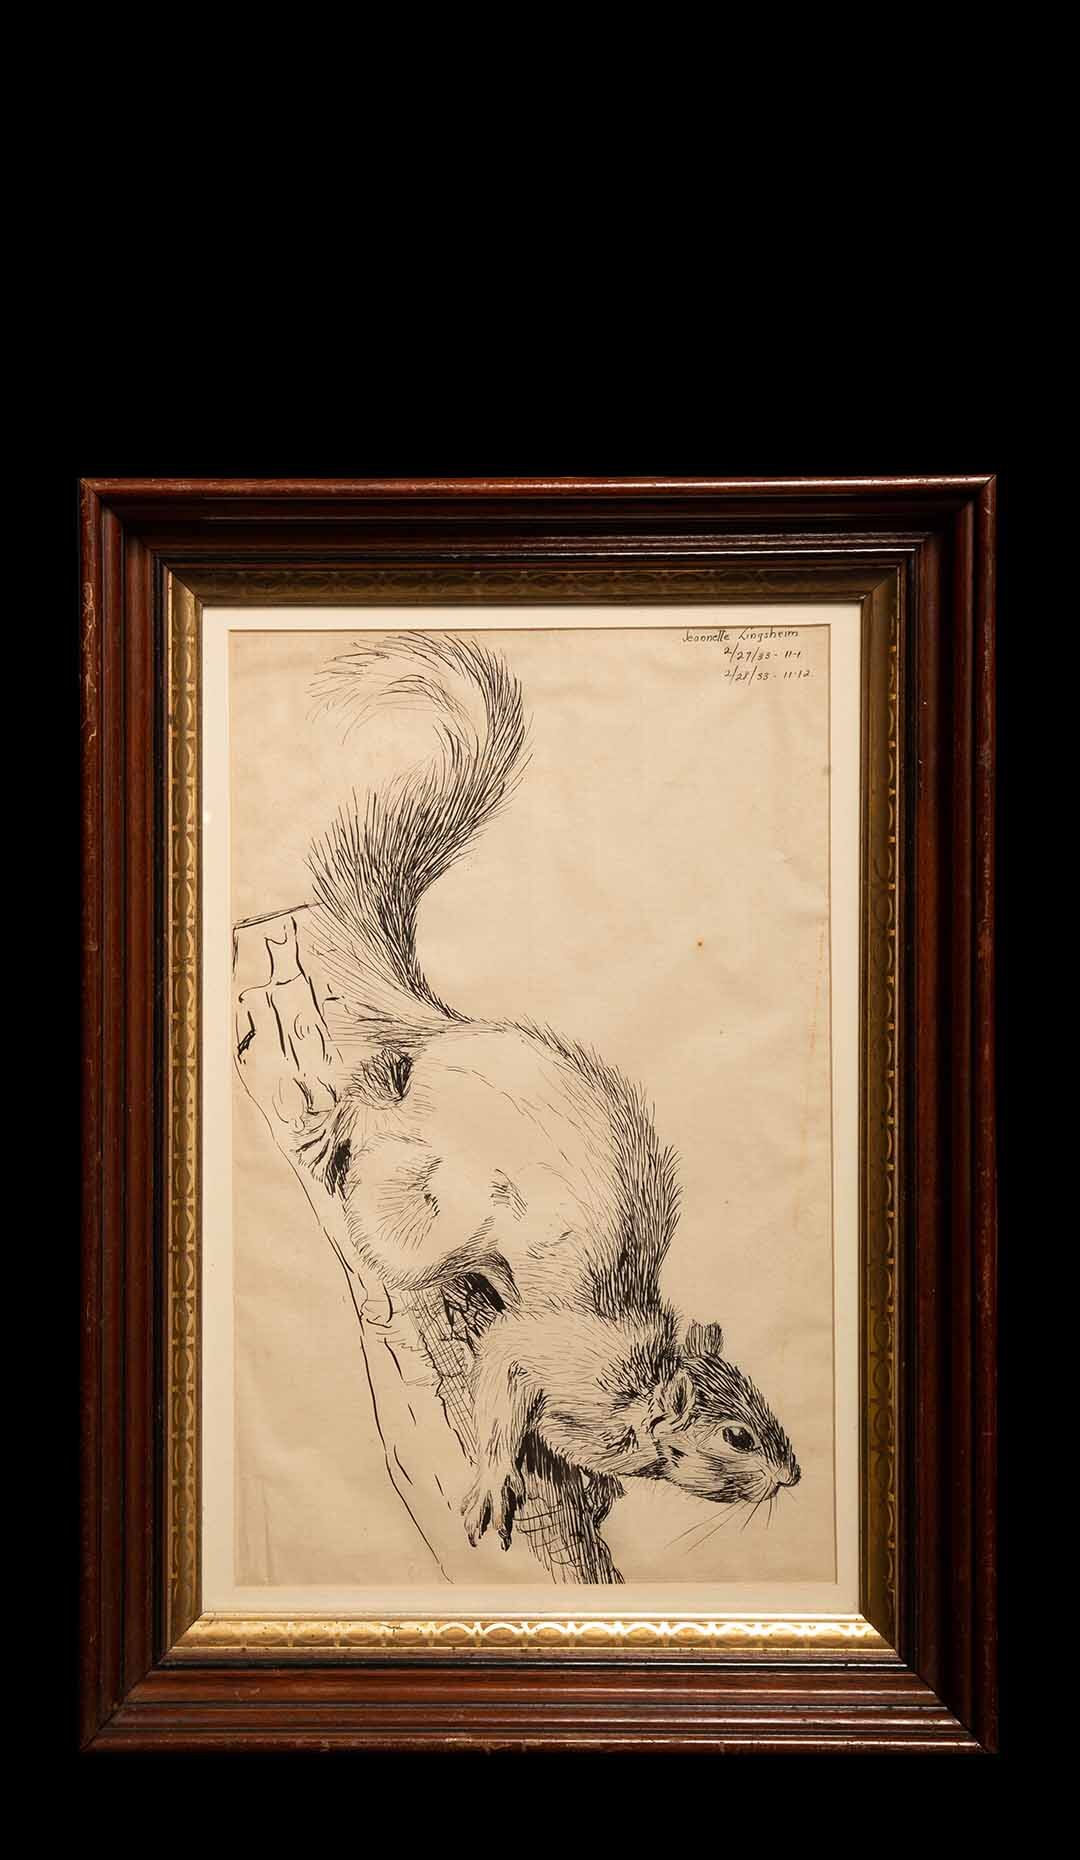 Pen and Ink Drawing of a Squirrel from 1933